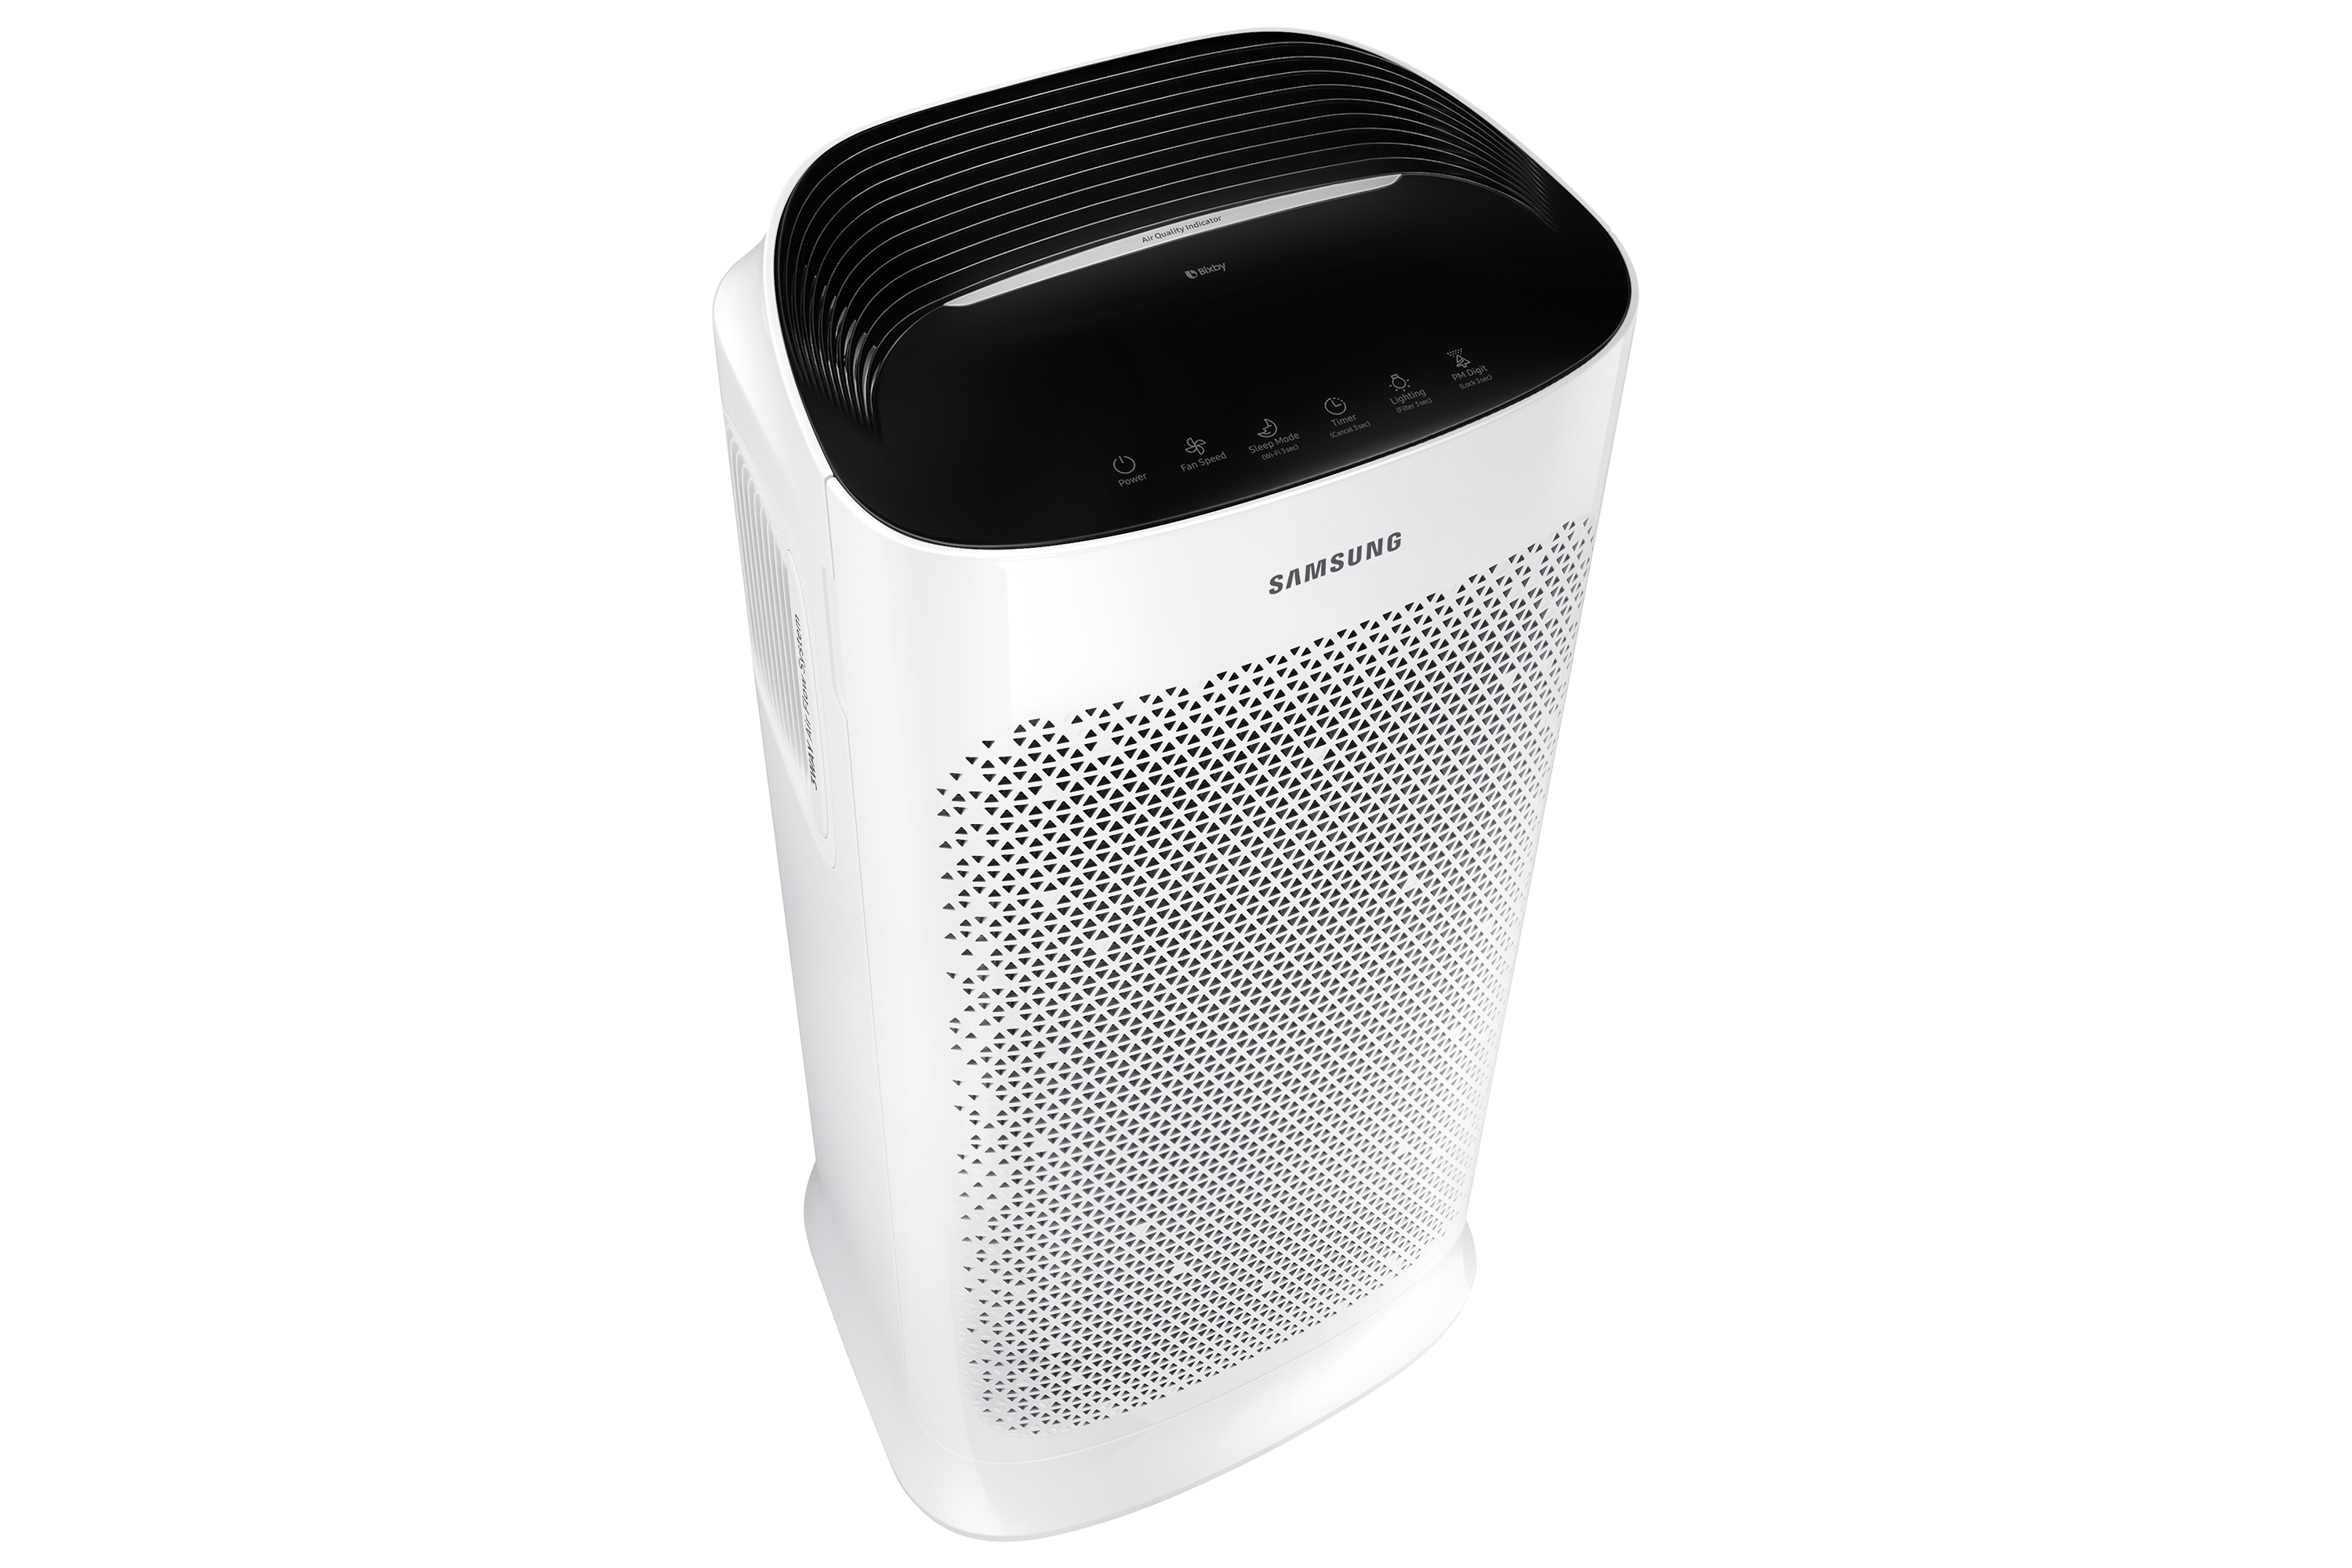 AX5500 Air Purifier Samsung 4 Samsung Air Purifier Review: An Unobtrusive Way Of Improving Your Air Quality